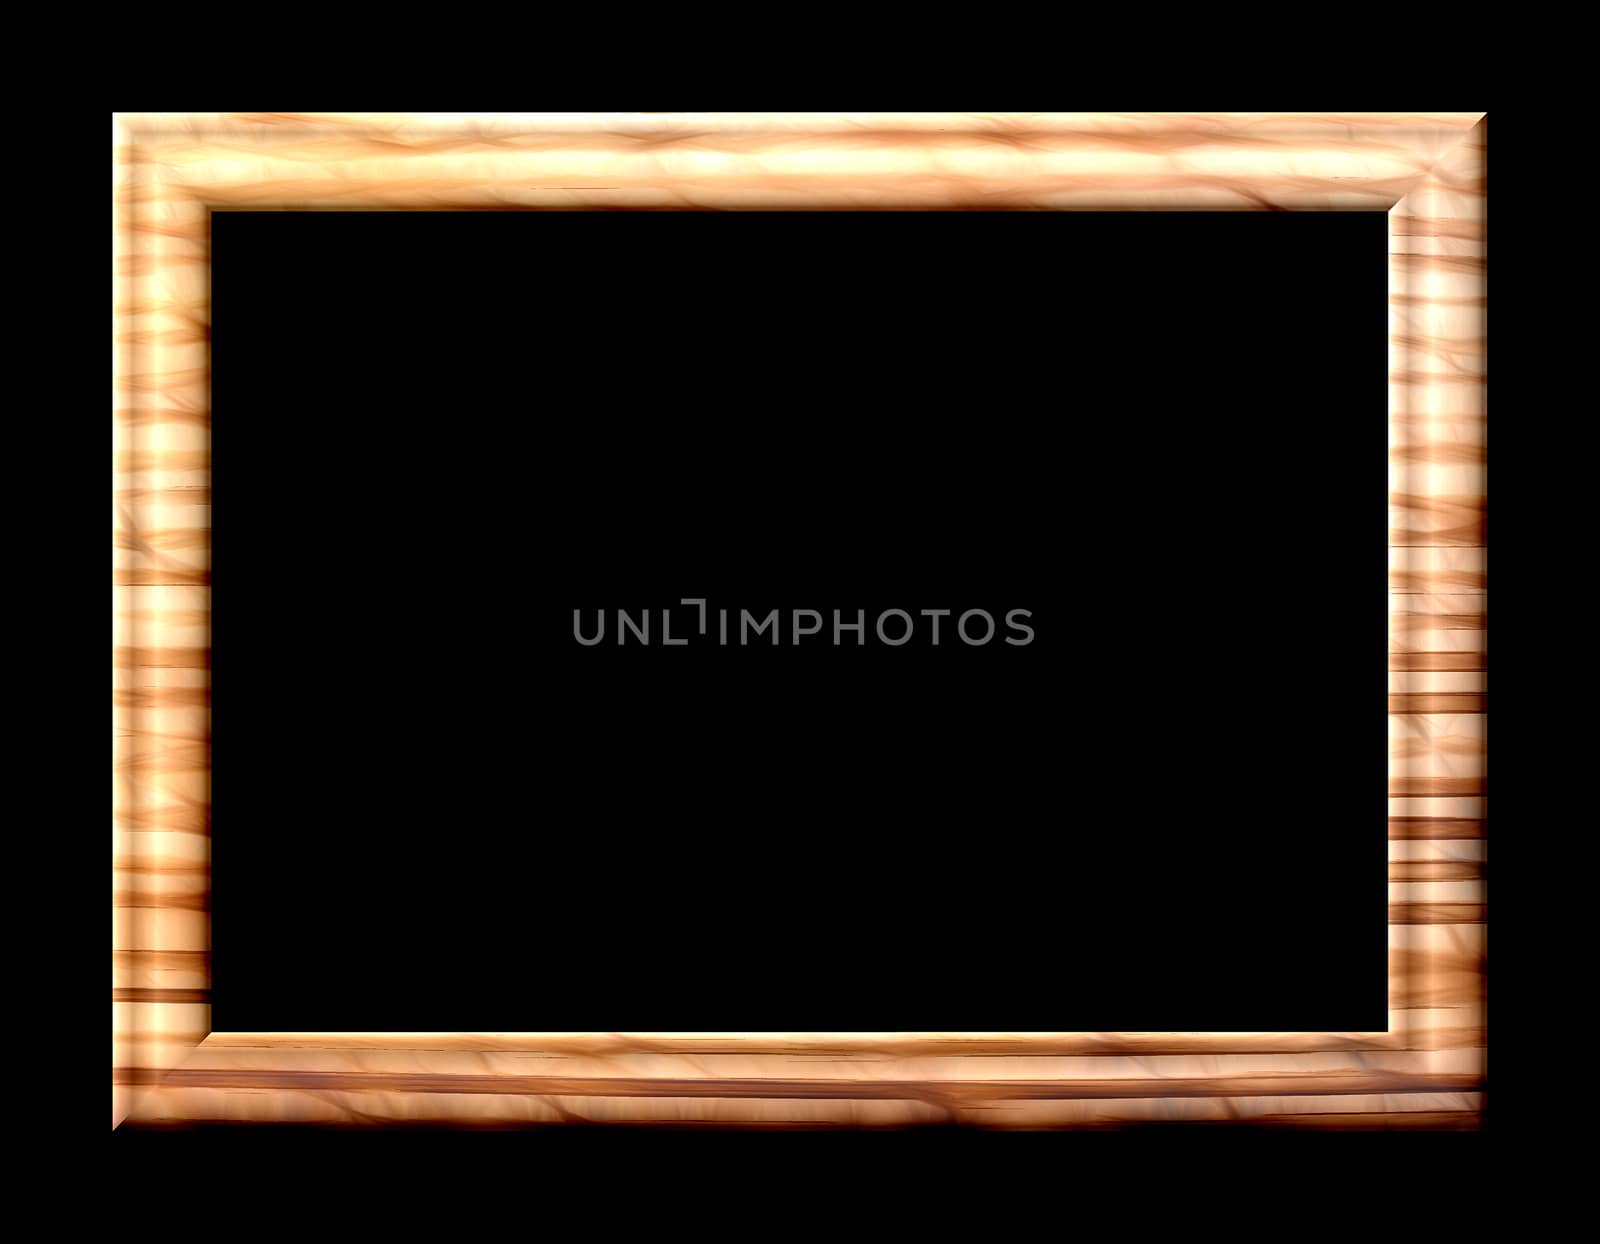 Rectangular embossed abstract empty photo frame with blurred texture yellow - brown tones on a black background